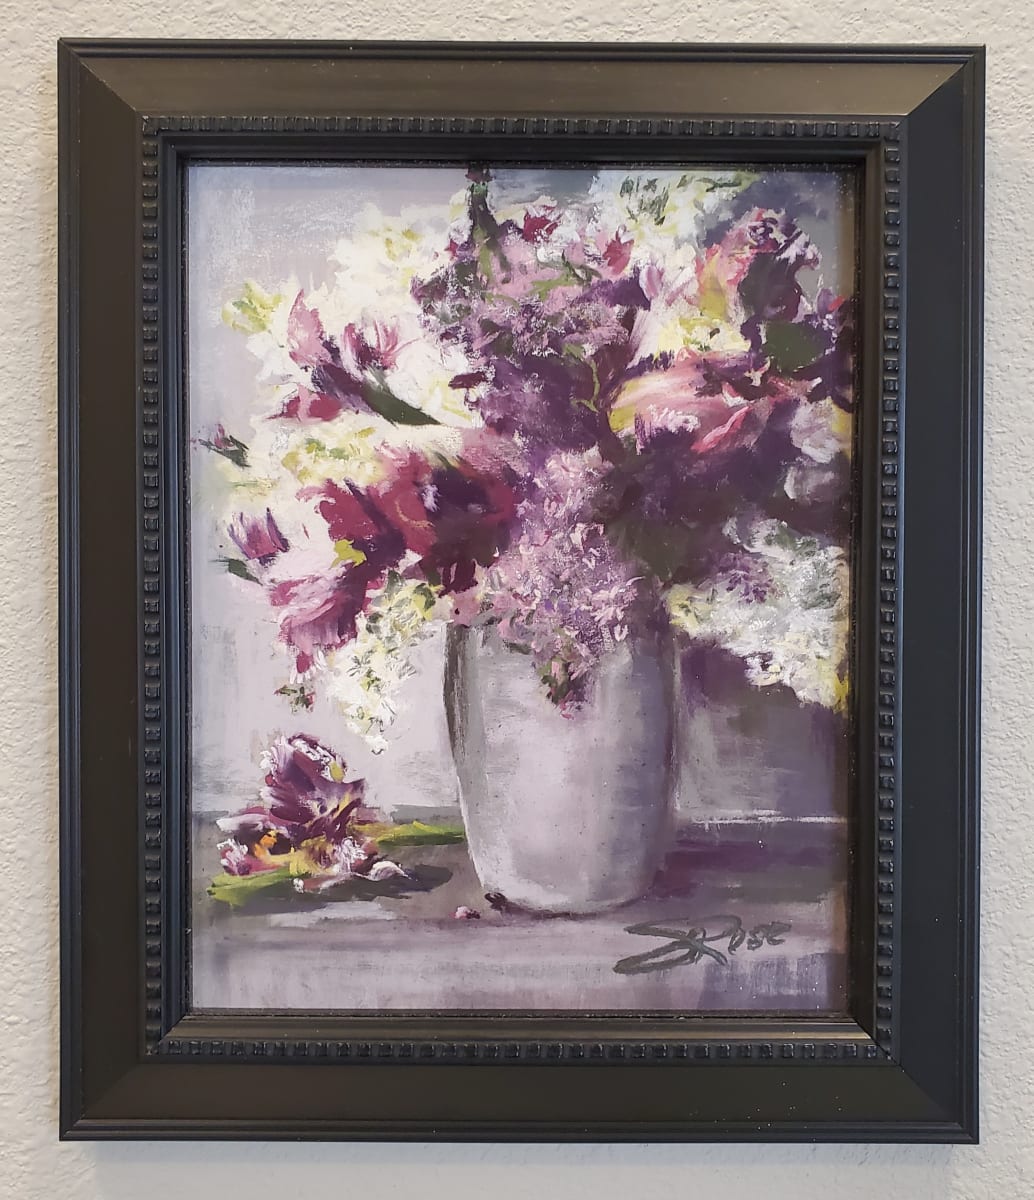 Lilacs and Parrot Tulips by Sue Rose  Image: Lilacs and Parrot Tulips, pastel painting by Sue Rose.